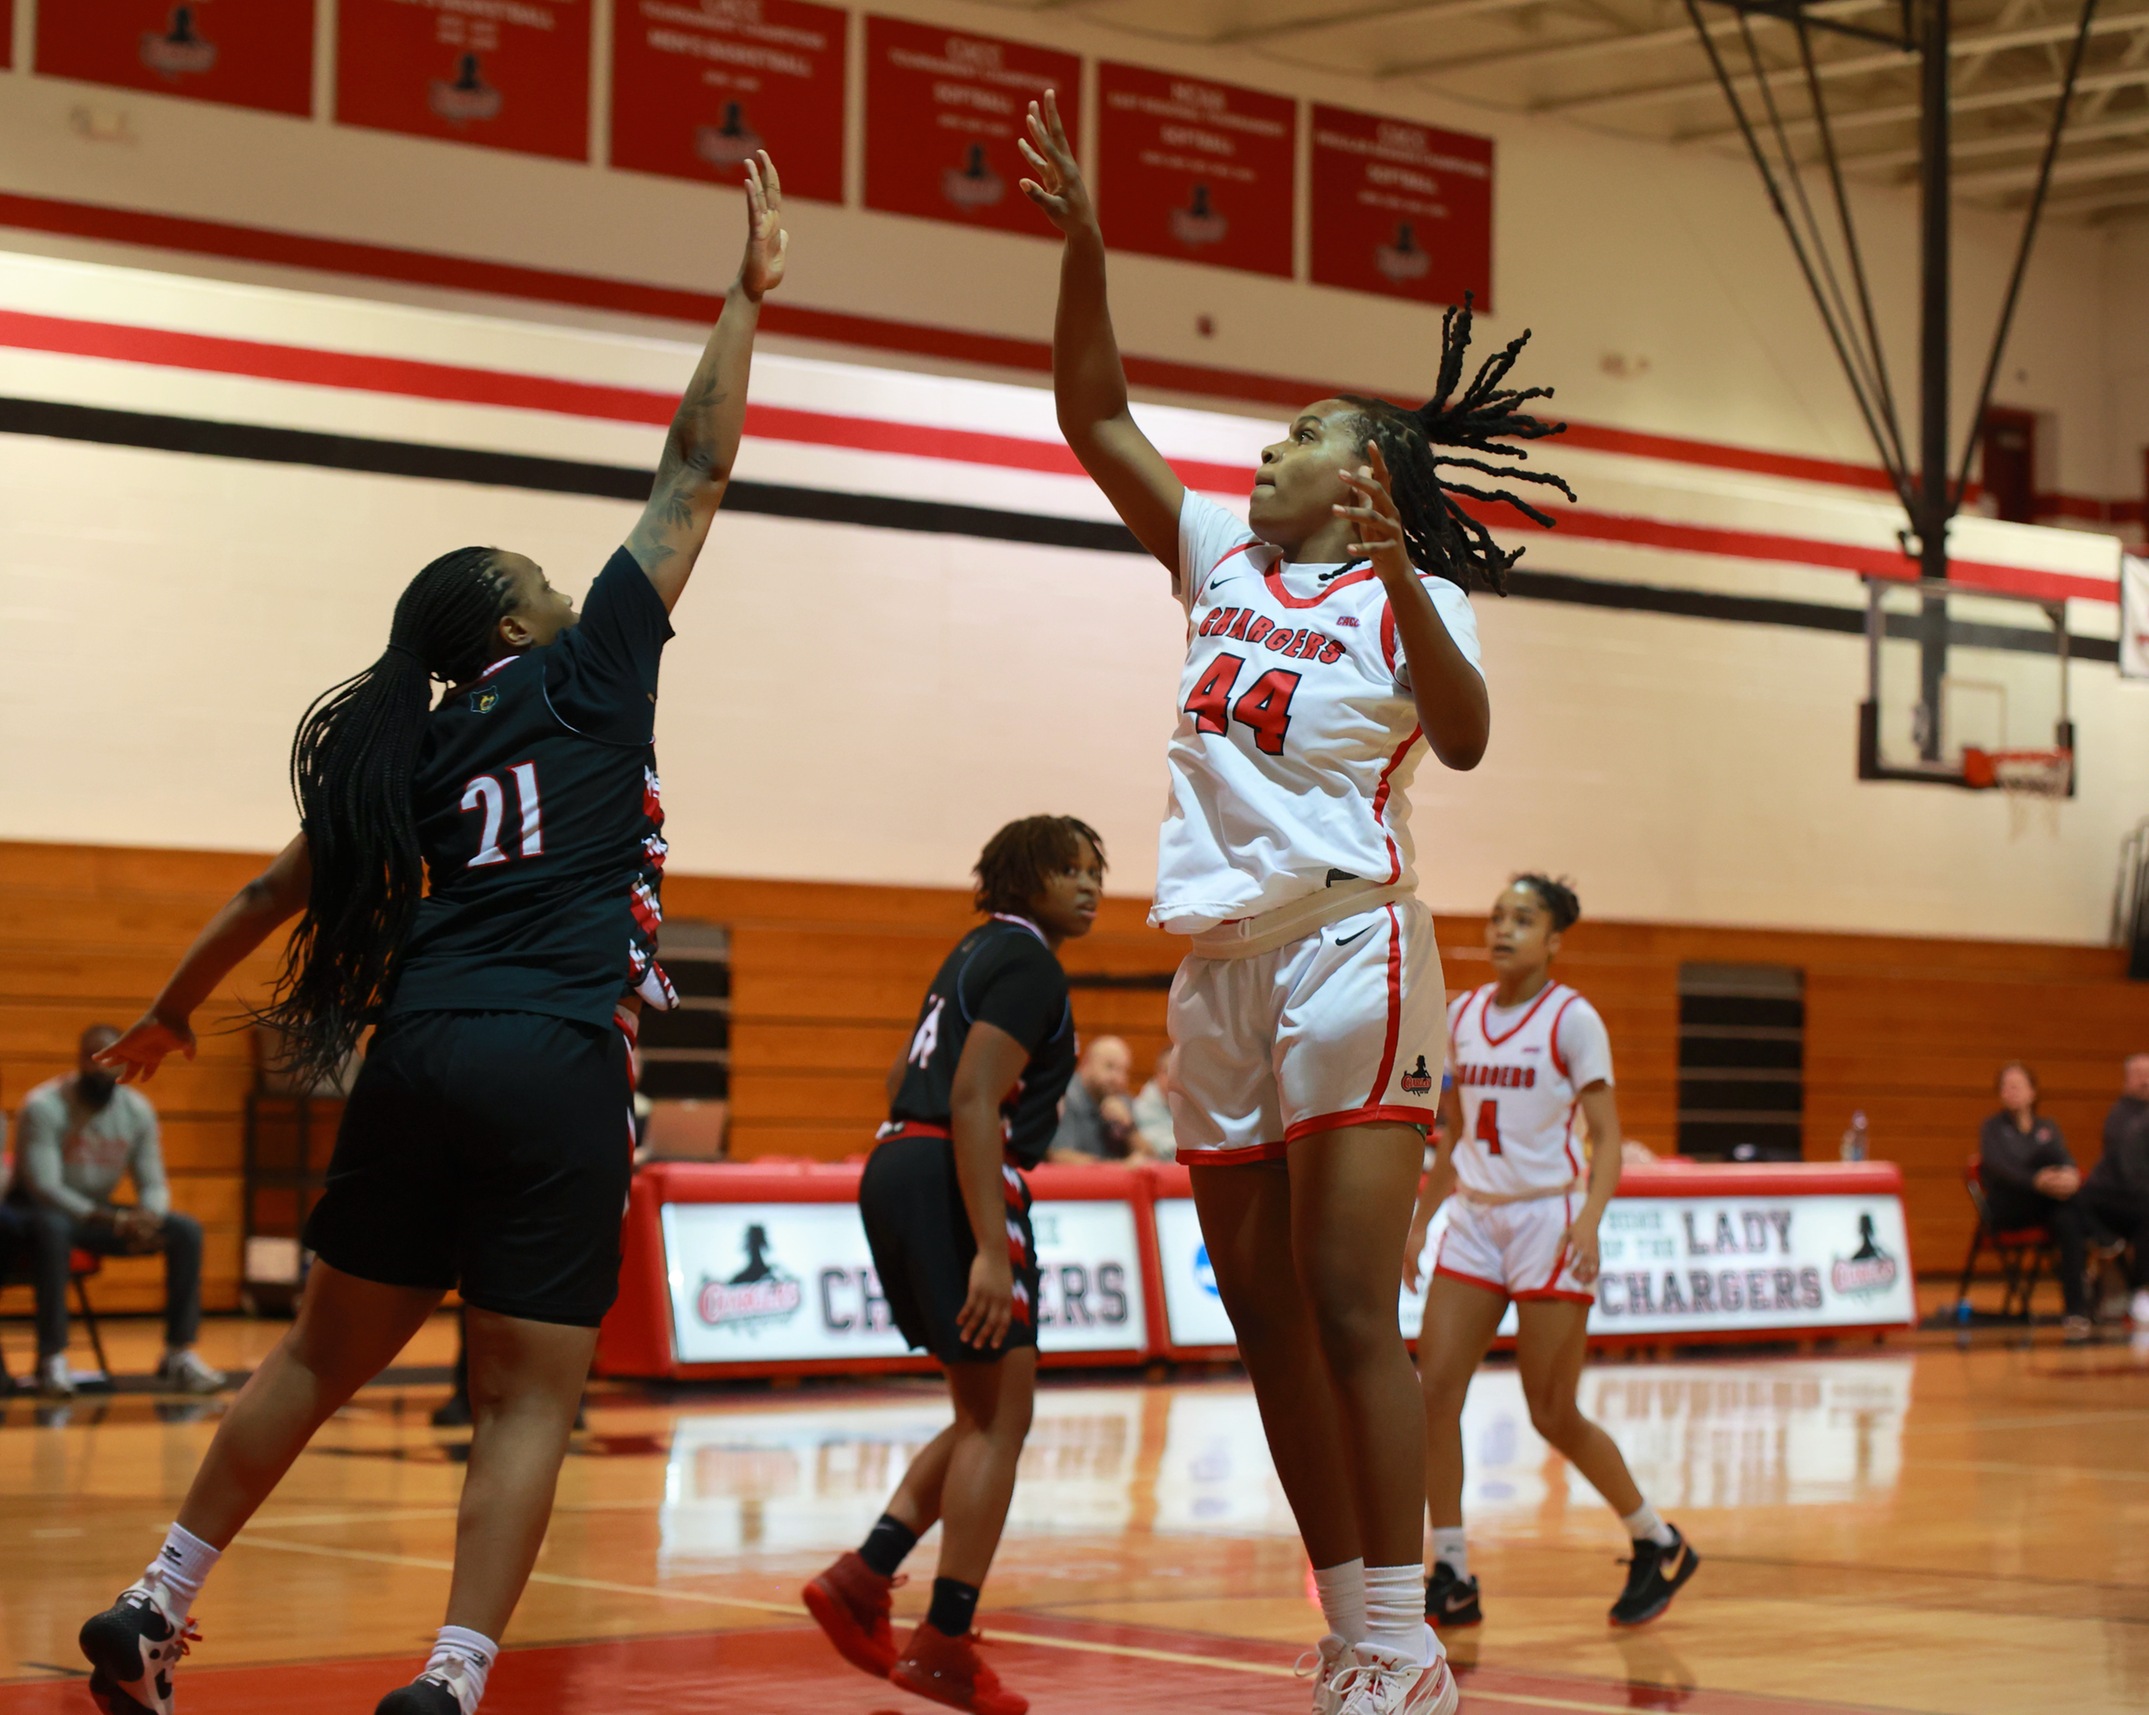 LADY CHARGERS EDGED BY BEARS